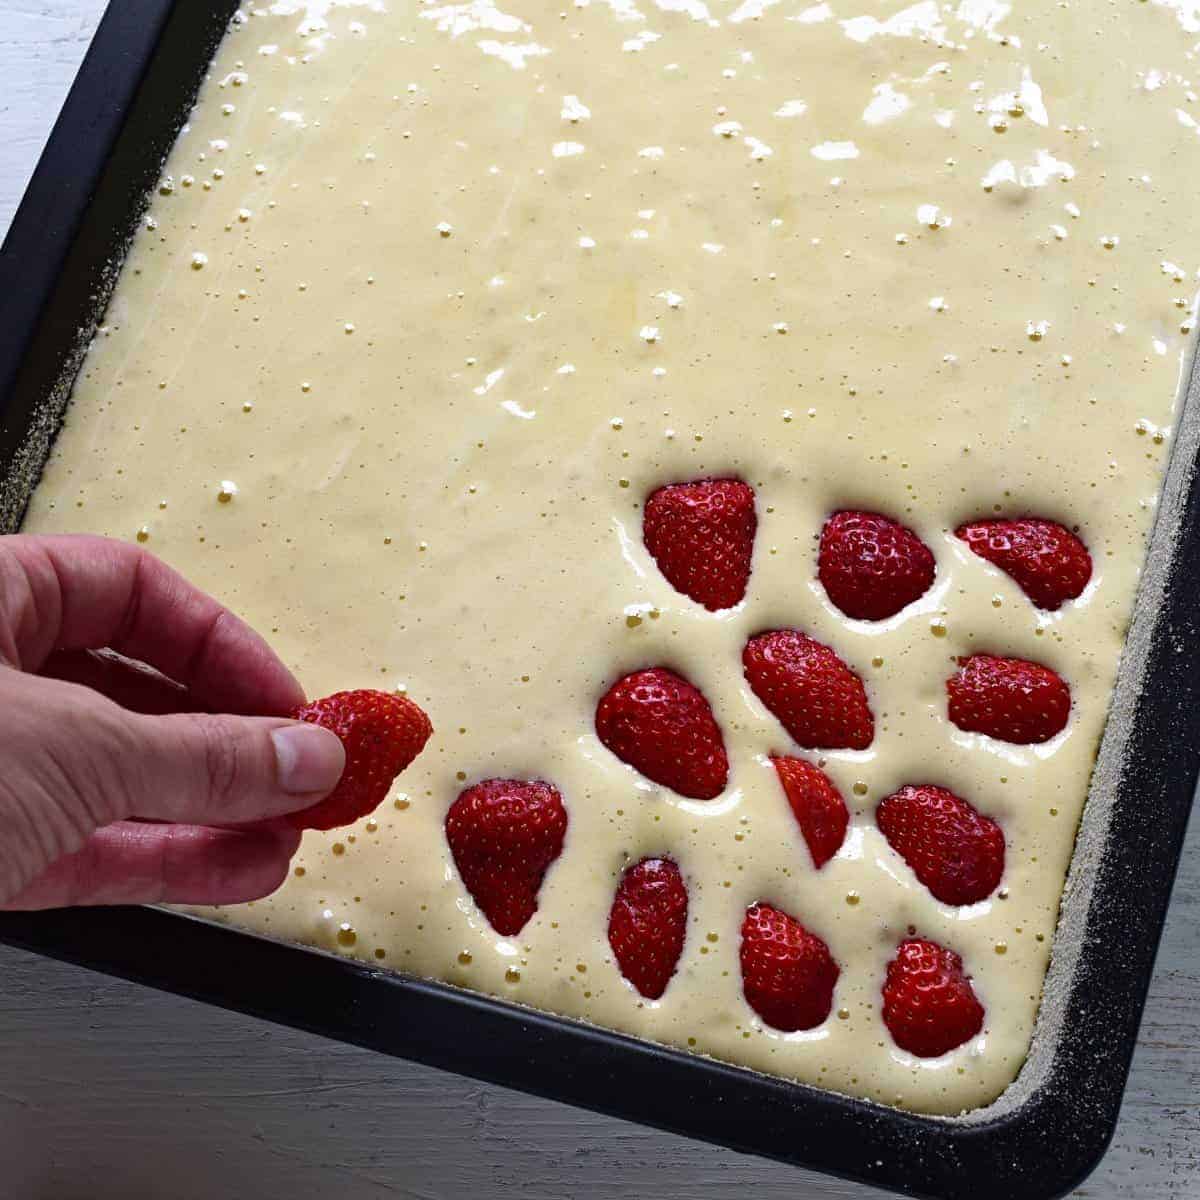 putting strawberries on a batter